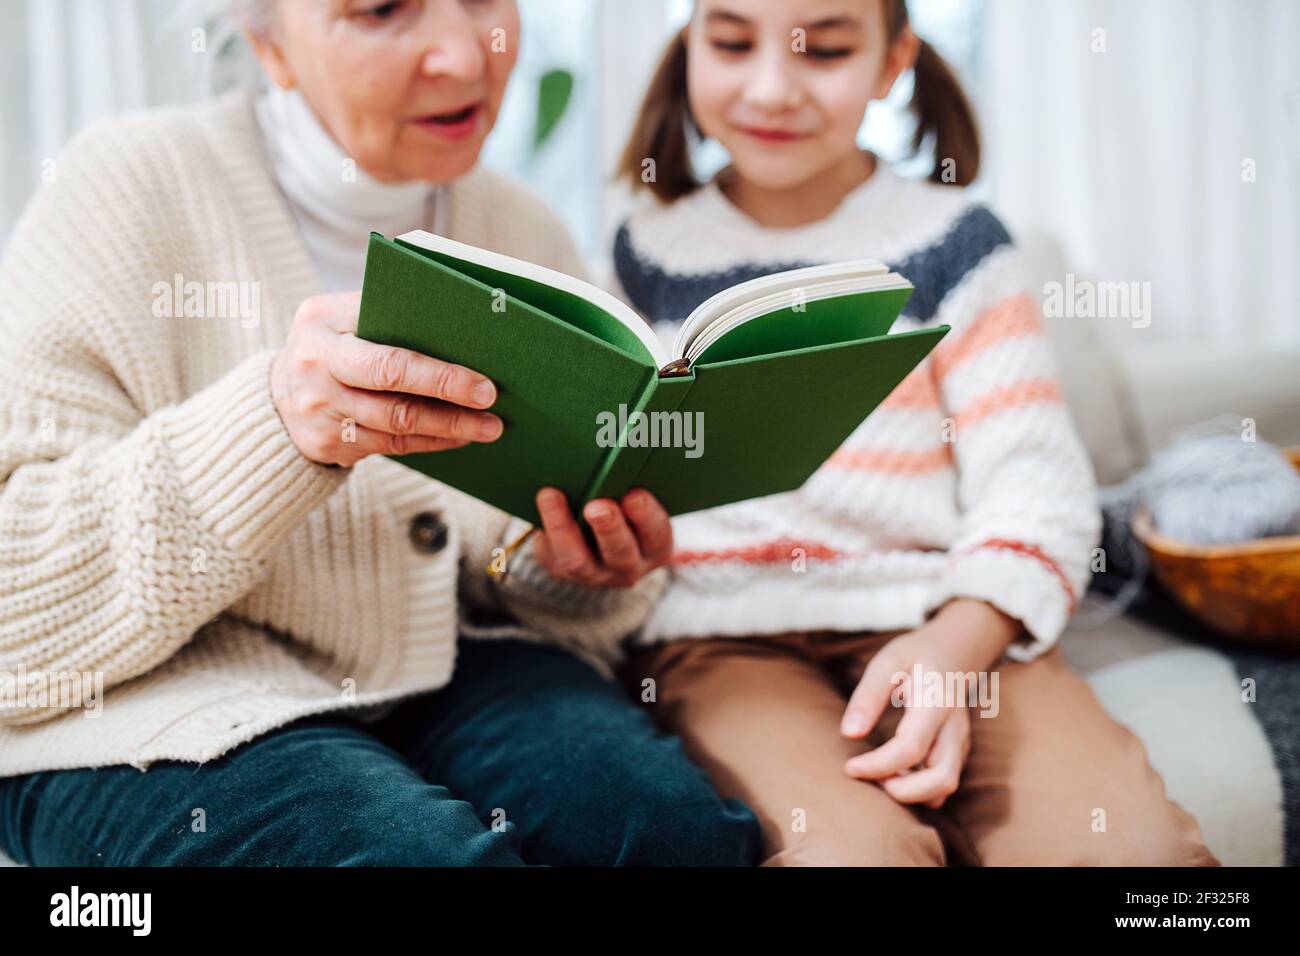 Good granny sitting on a couch with her granddaughter. they are reading a book together. Focus on the object, faces blurred. Stock Photo